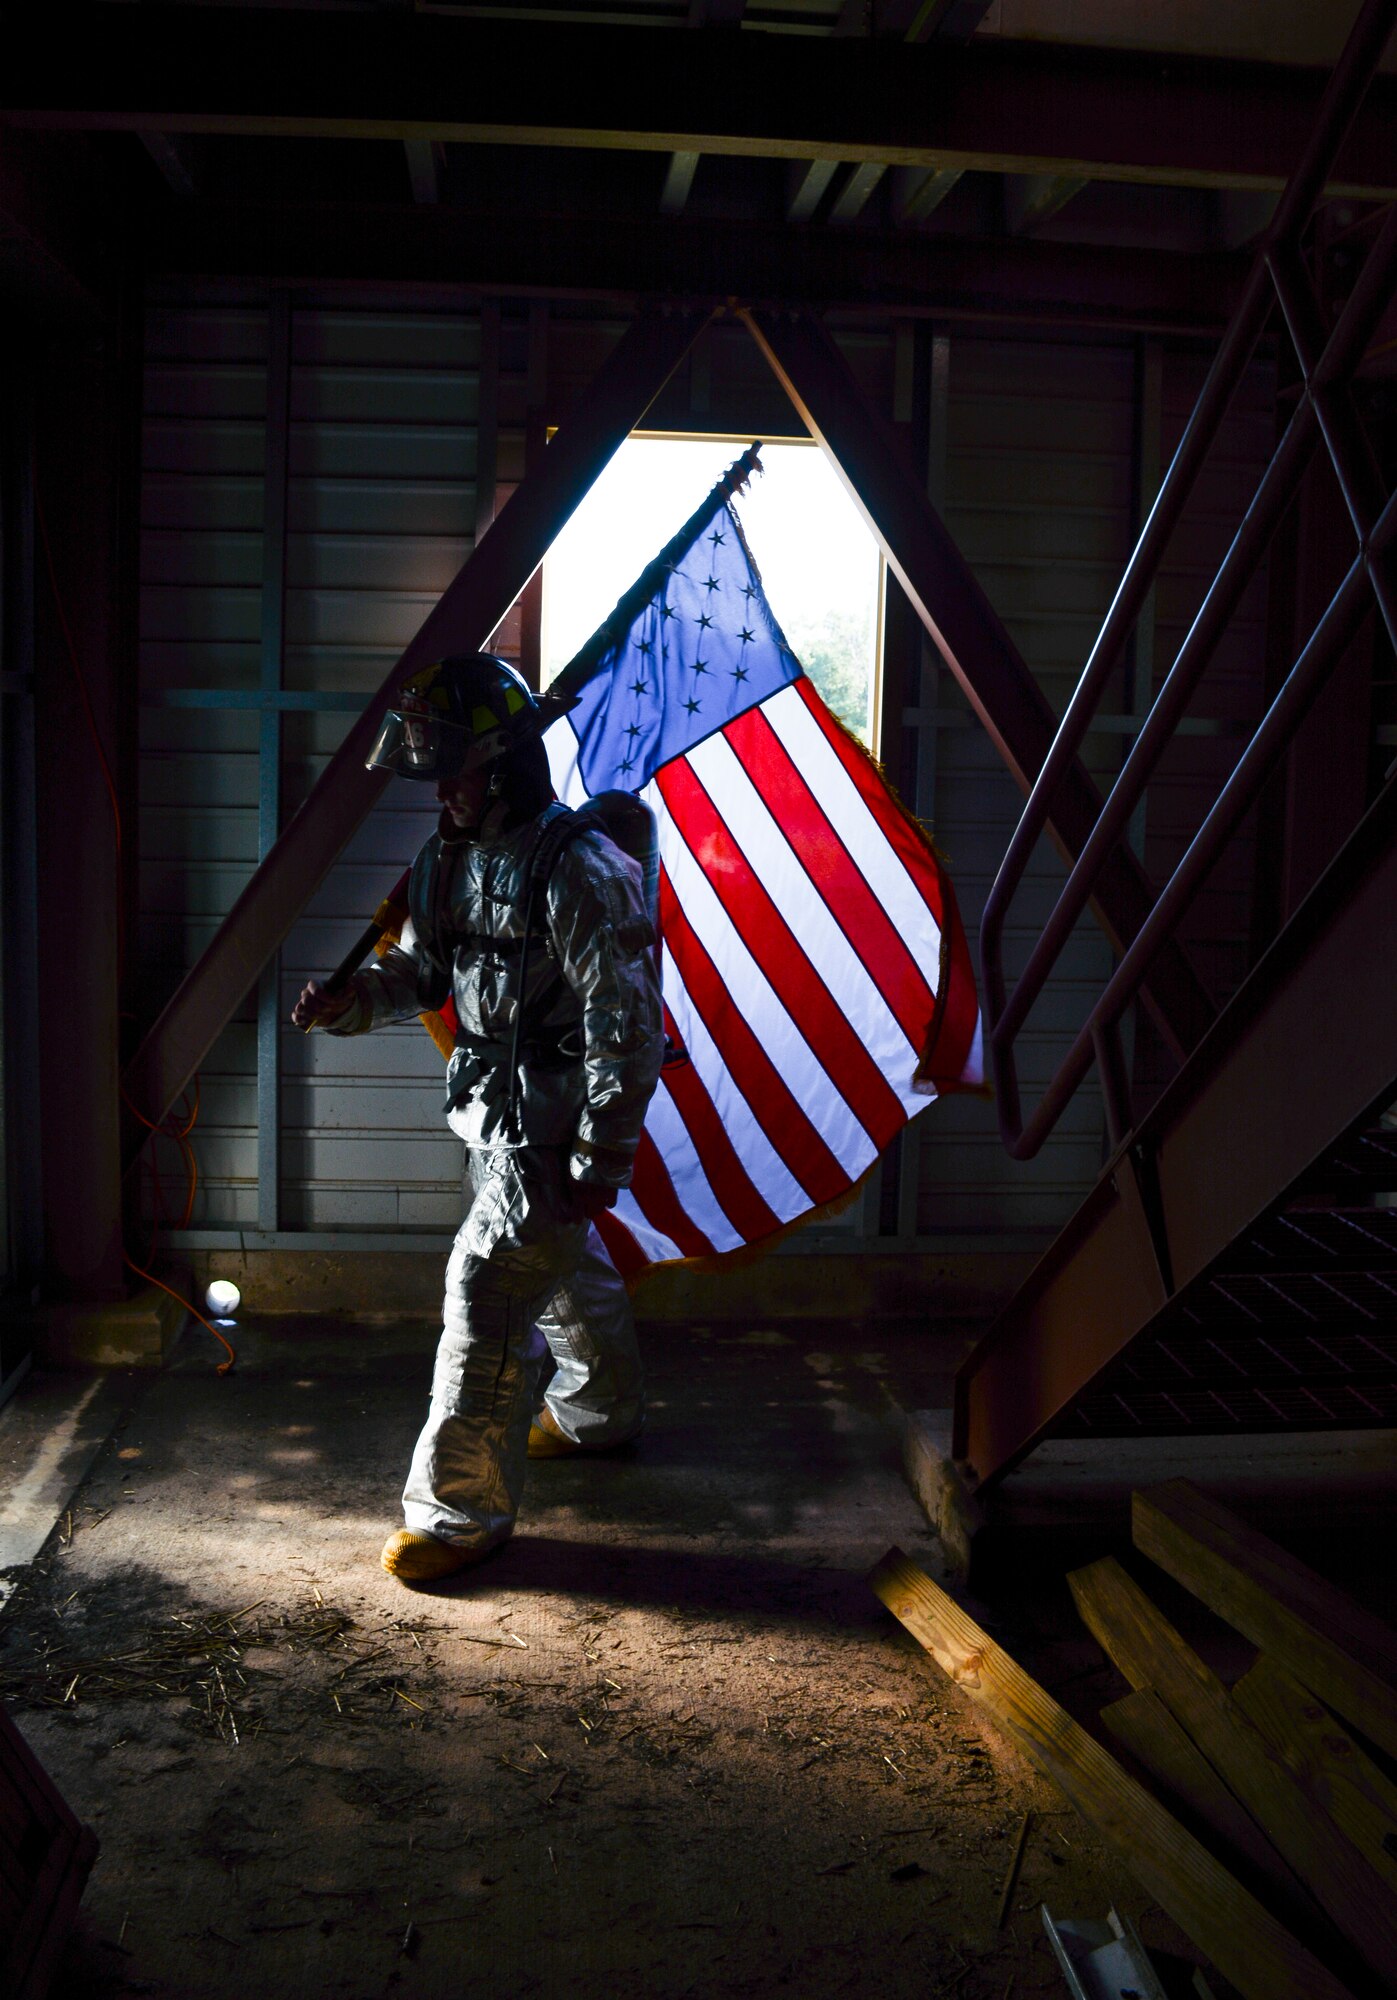 Staff Sgt. Chase Blair carries the U.S. flag during the 5th Annual Fire Climb Sept. 7, 2014, at the fire training tower at Tinker Air Force Base, Okla. Blair is a firefighter with the 507th Civil Engineer Squadron. Reservists from the CES and 507th ARW took turns carrying the flag up and down the equivalent of 110 stories to commemorate the 343 firefighters, emergency medical technicians and paramedics who lost their lives during the 9/11 attacks on the World Trade Centers. (U.S. Air Force photo/Senior Airman Mark Hybers) 